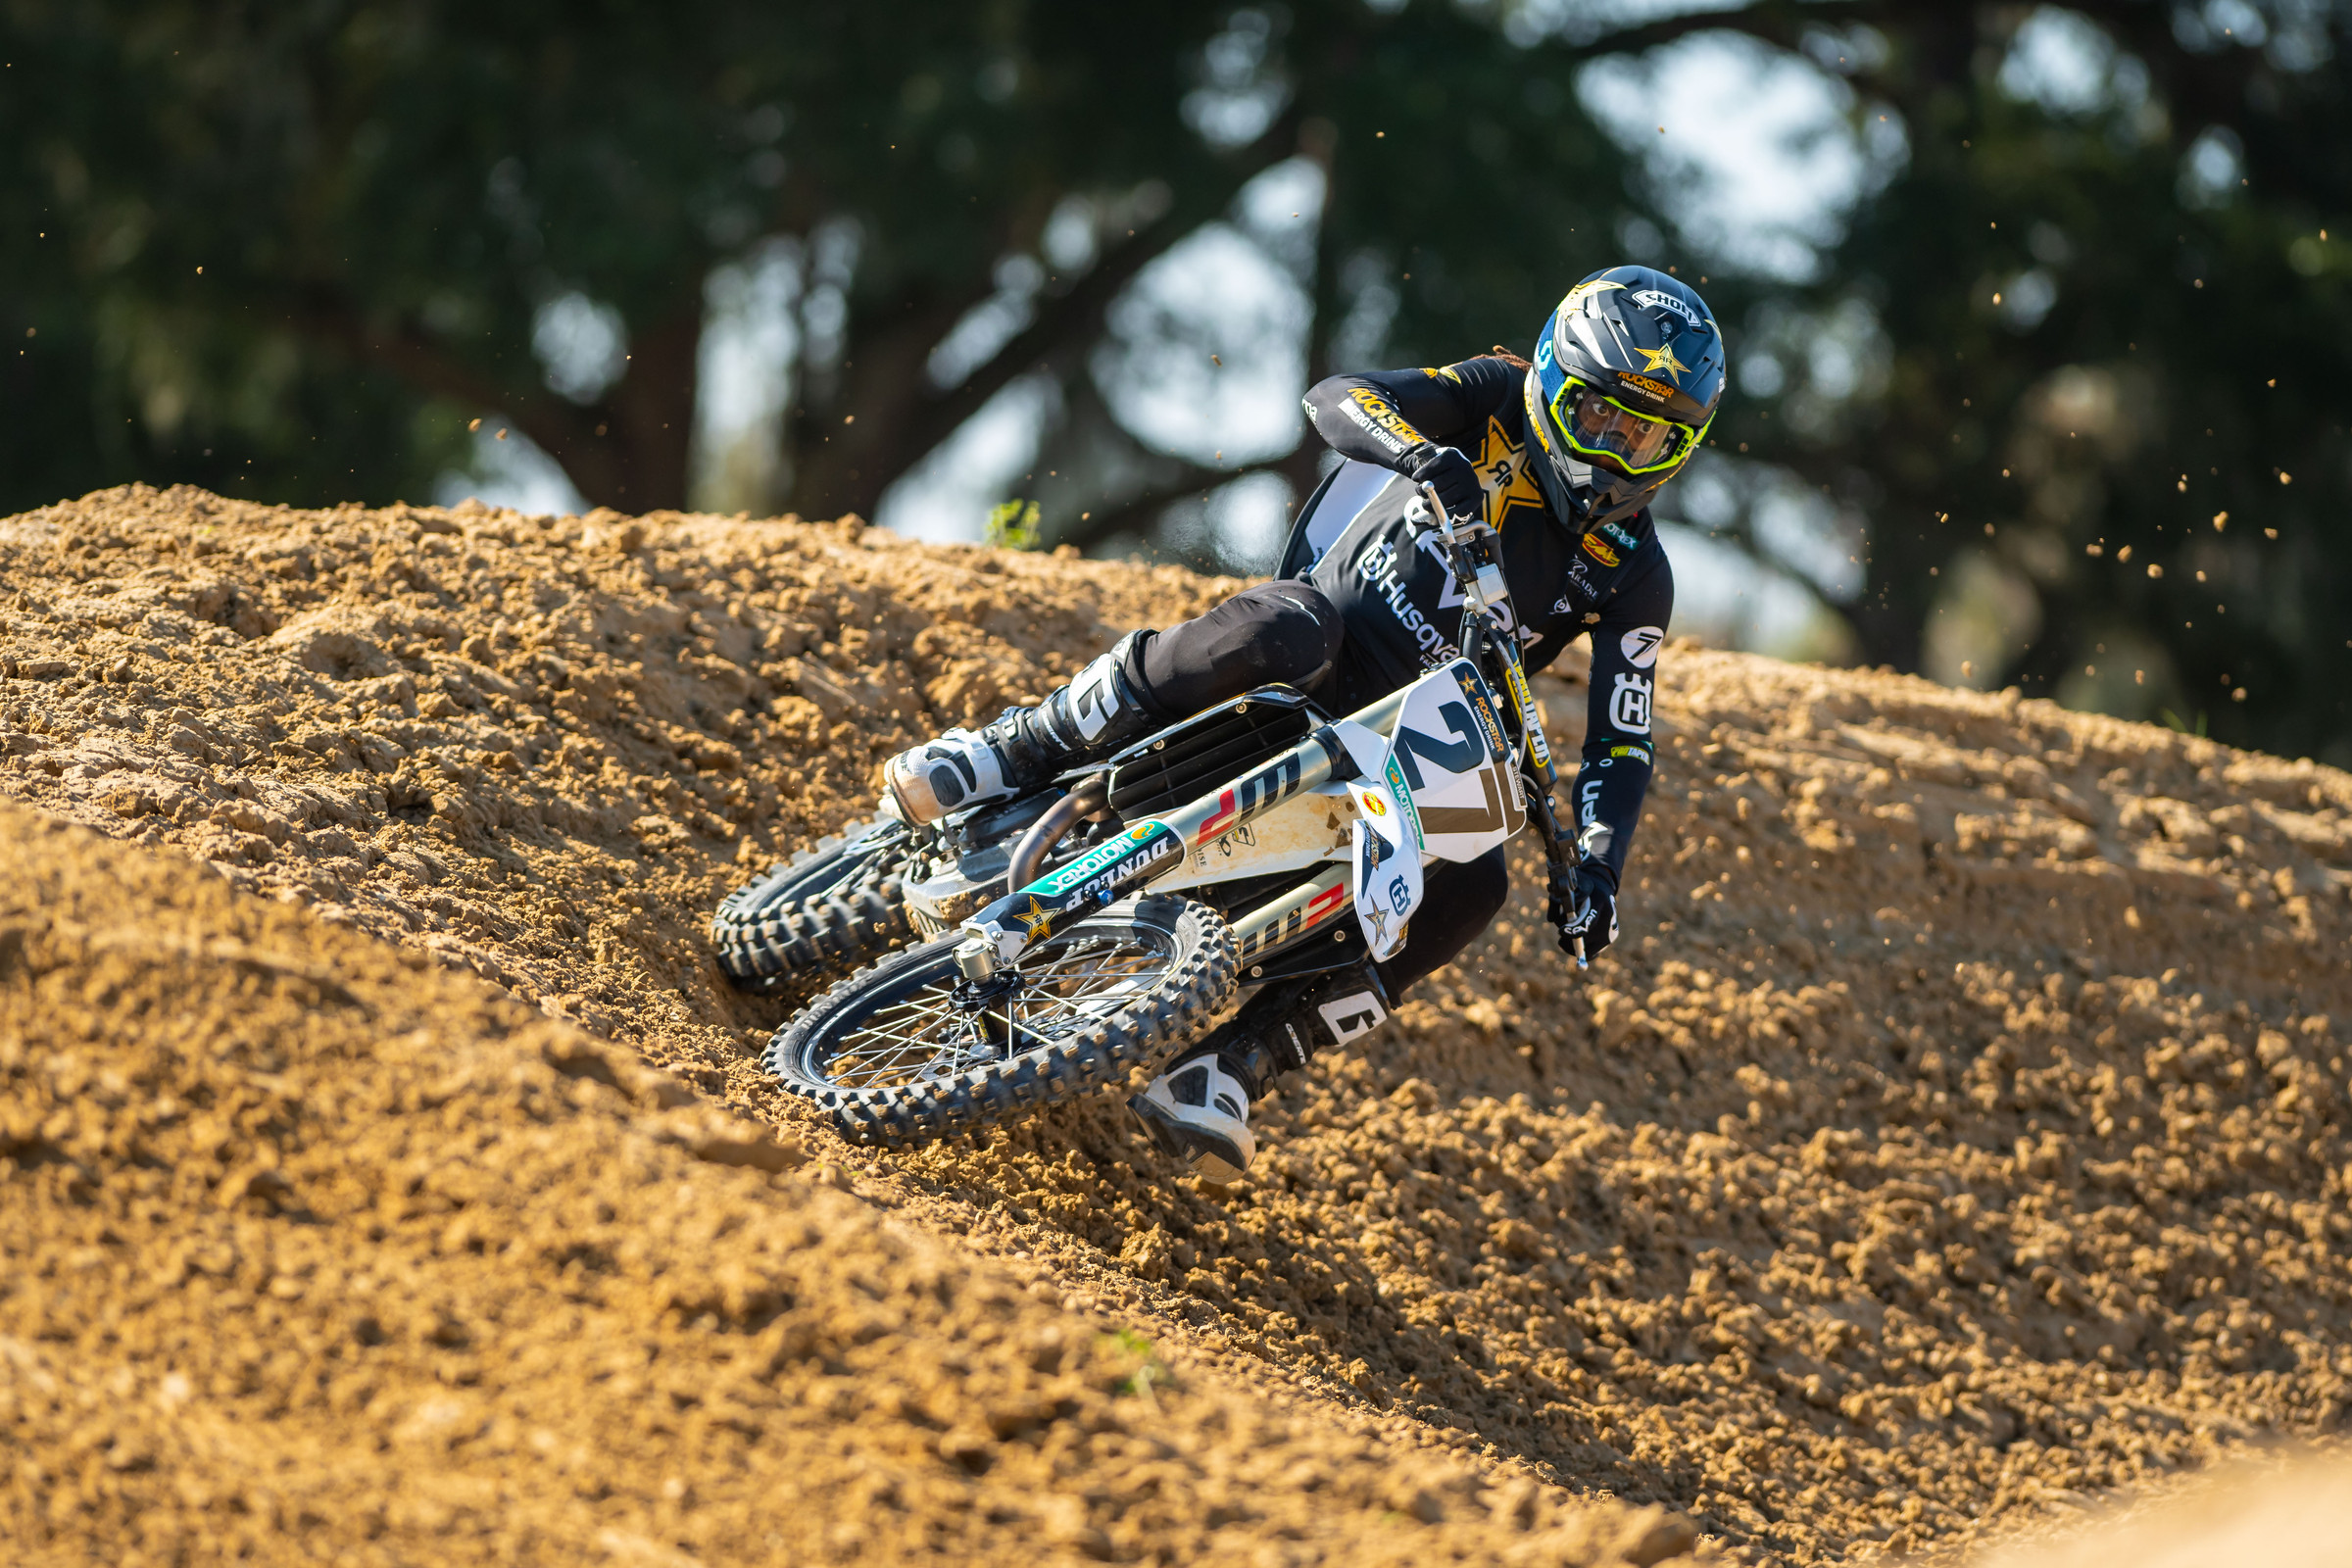 How to Stream and Watch 2022 Anaheim 1 Supercross on TV